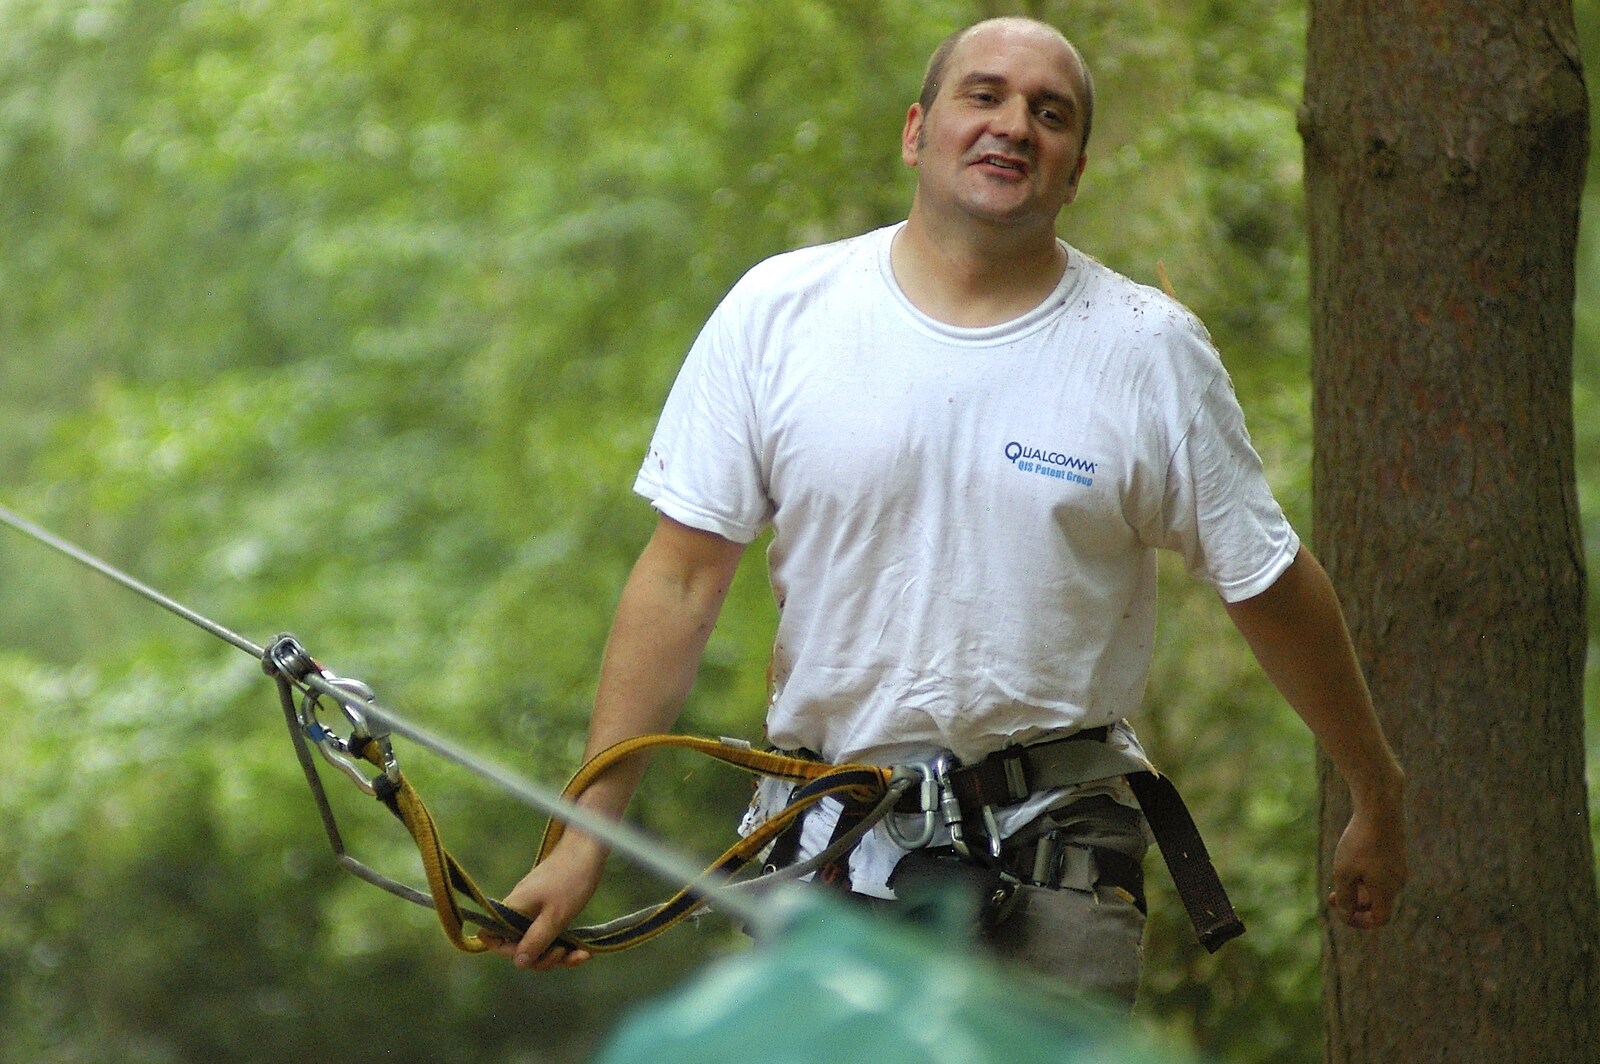 Francis gets off the final slide from Qualcomm Cambridge "Go Ape", High Lodge, Thetford Forest - 27th July 2006